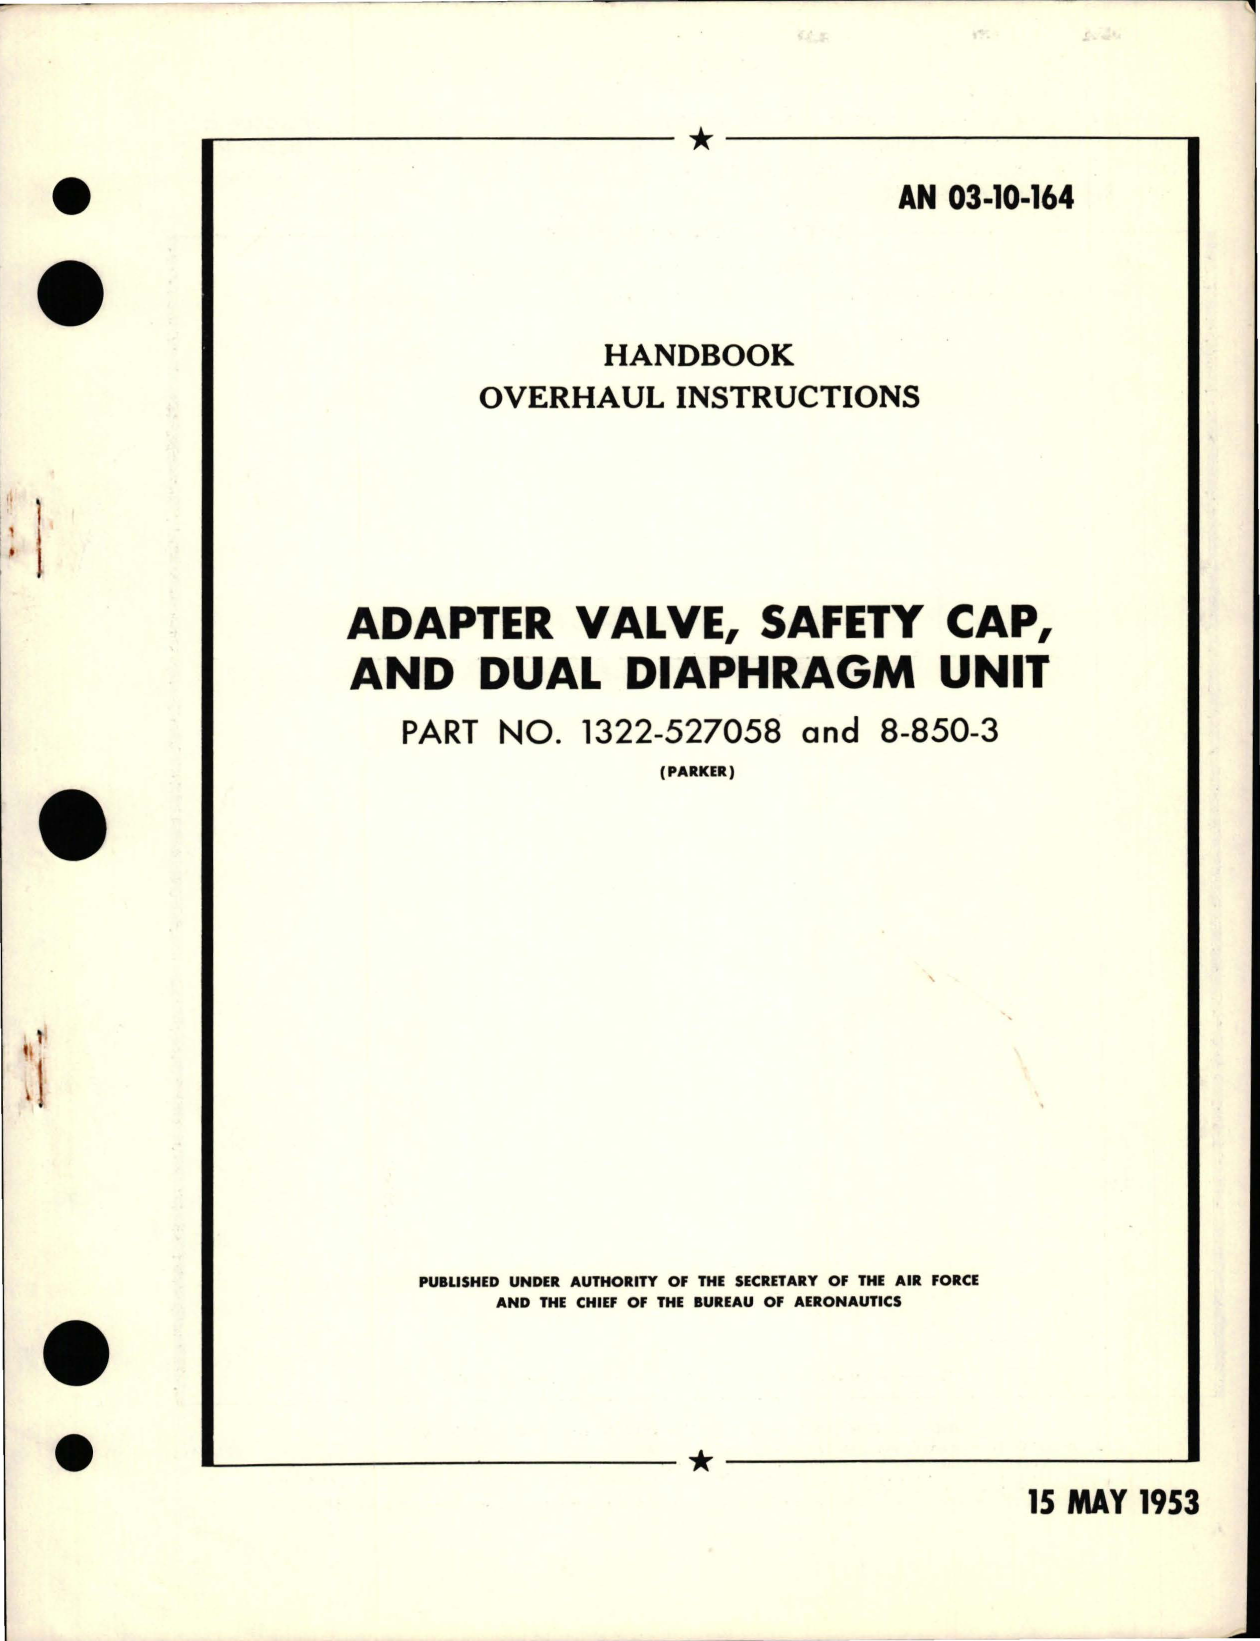 Sample page 1 from AirCorps Library document: Overhaul Instructions for Adapter Valve, Safety Cap and Dual Diaphragm Unit - Part 1322-527058 and 8-850-3 